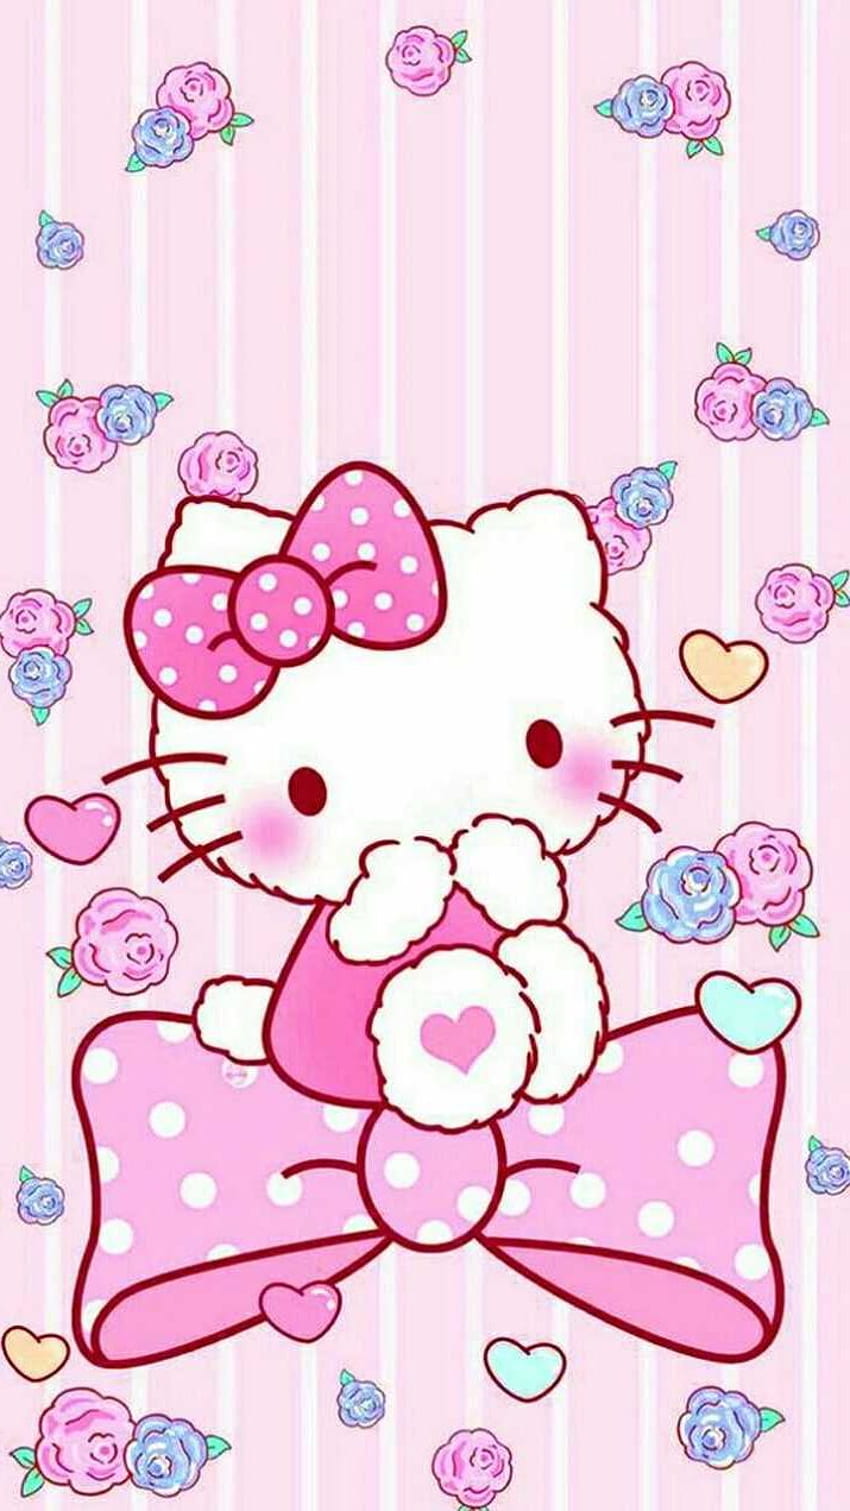 Share 86+ home screen hello kitty wallpaper latest - in.cdgdbentre